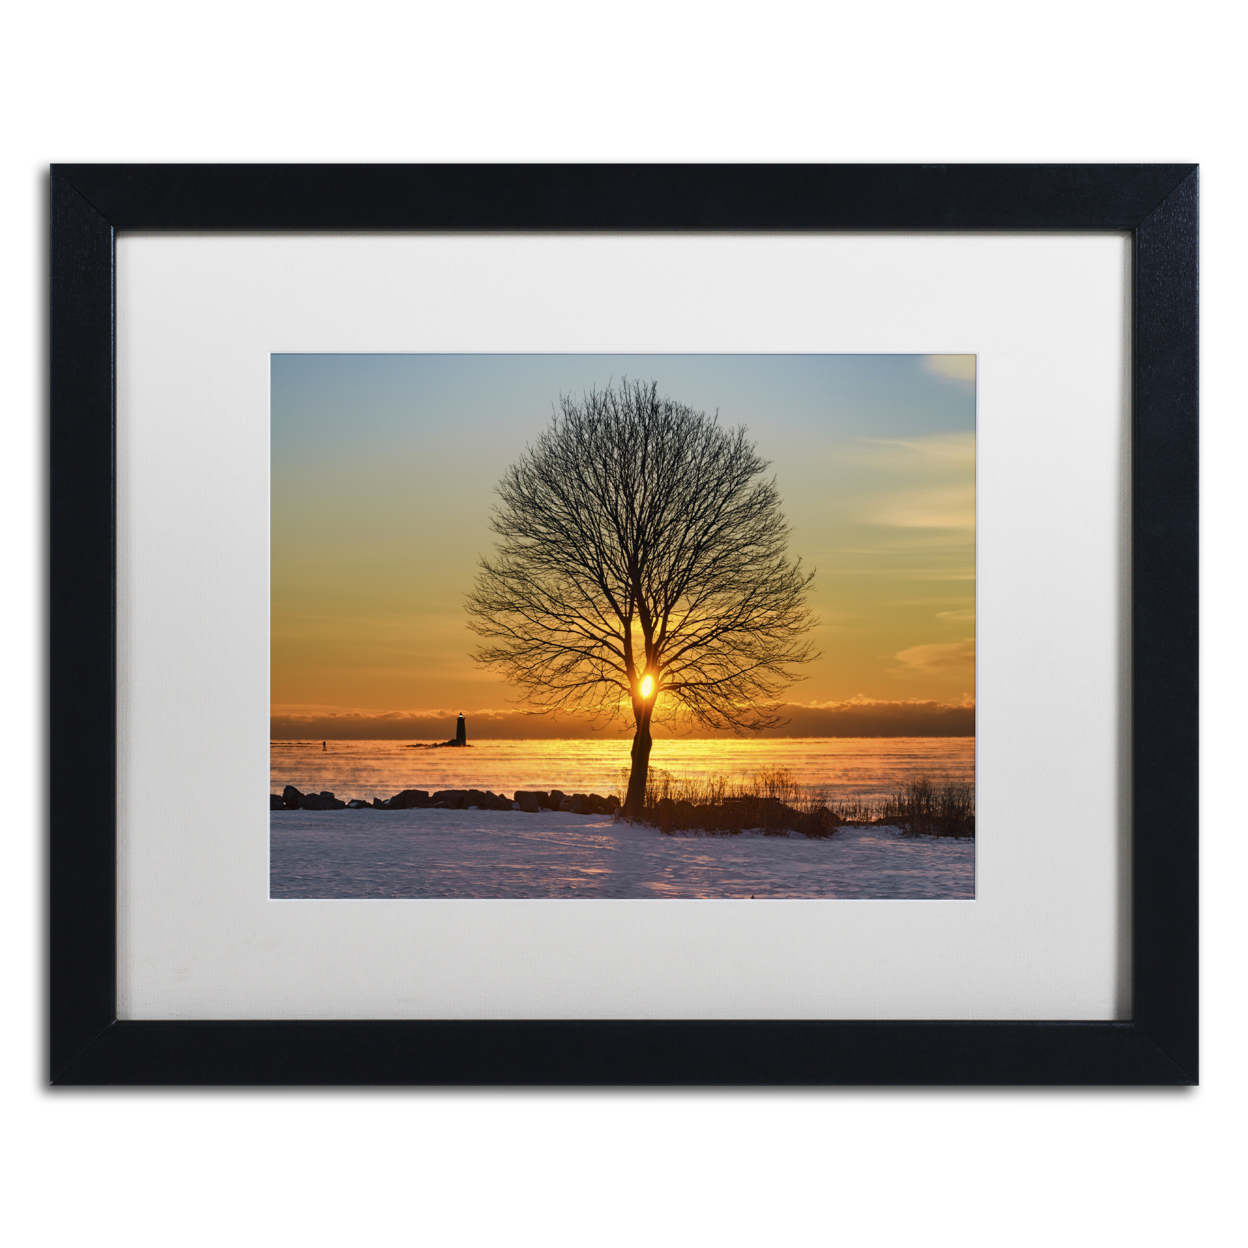 Michael Blanchette Photography 'Eye Of The Tree' Black Wooden Framed Art 18 X 22 Inches